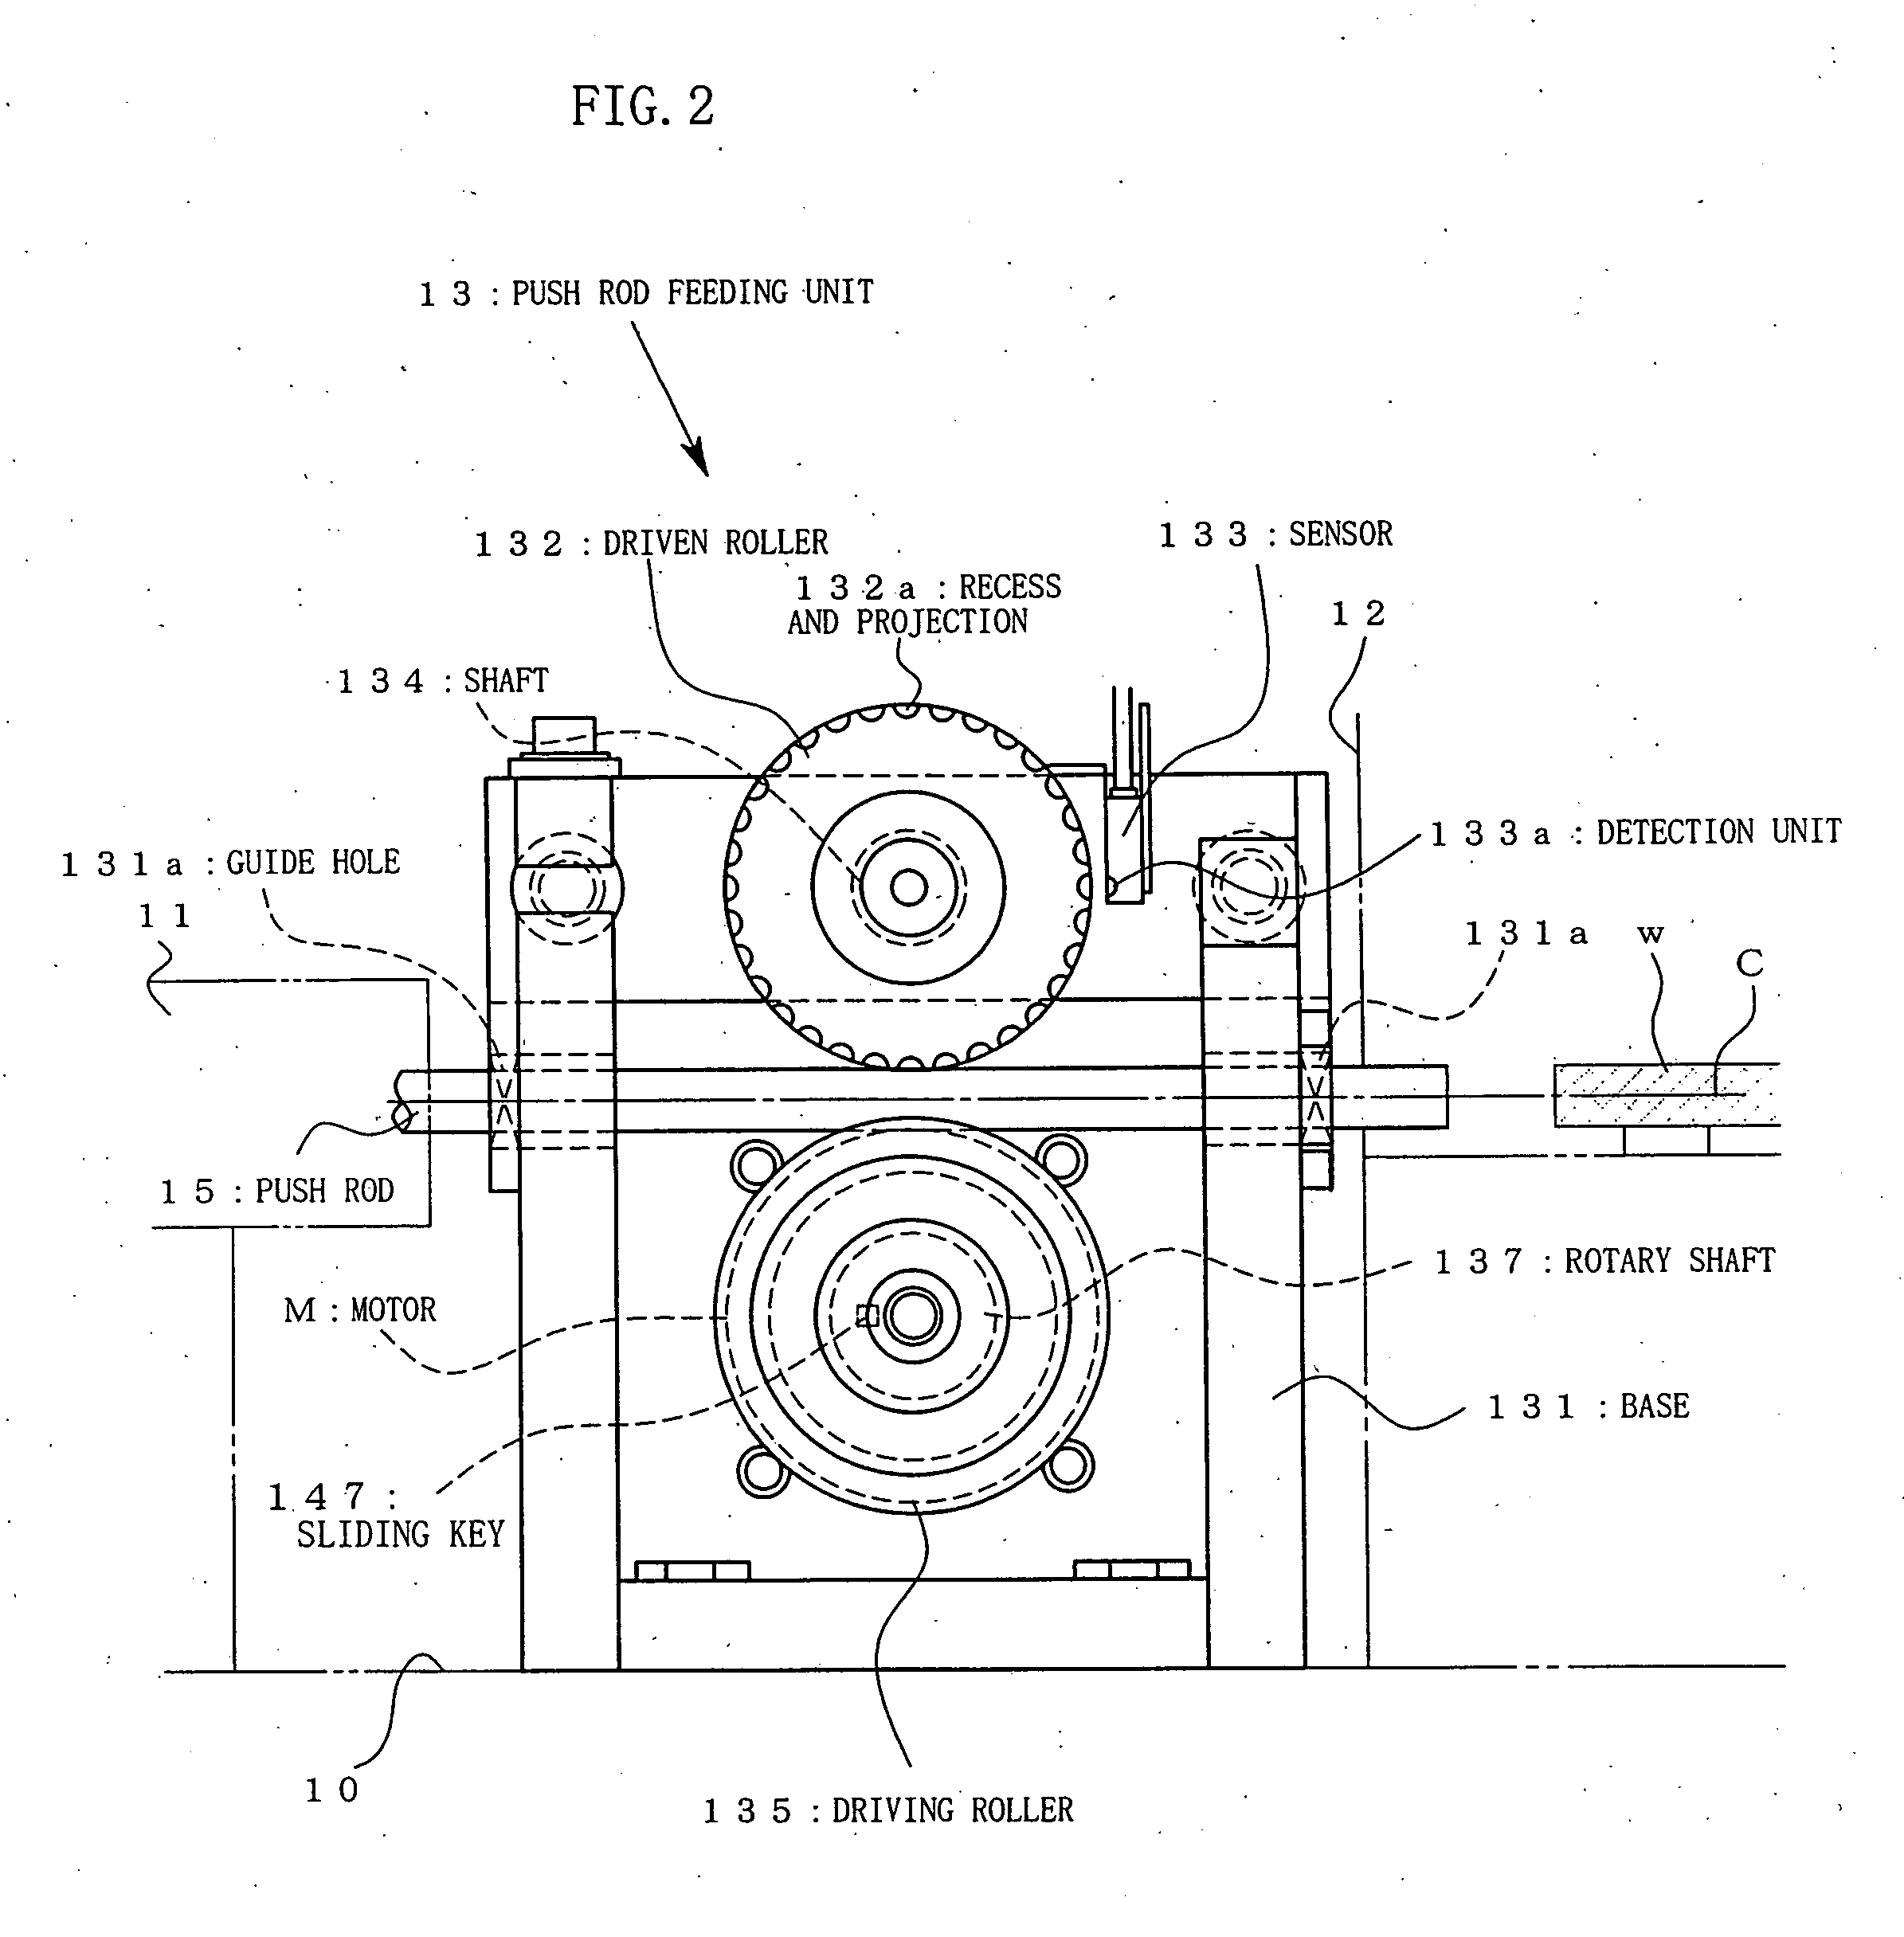 Bar material supply device of numerically controlled automatic lathe